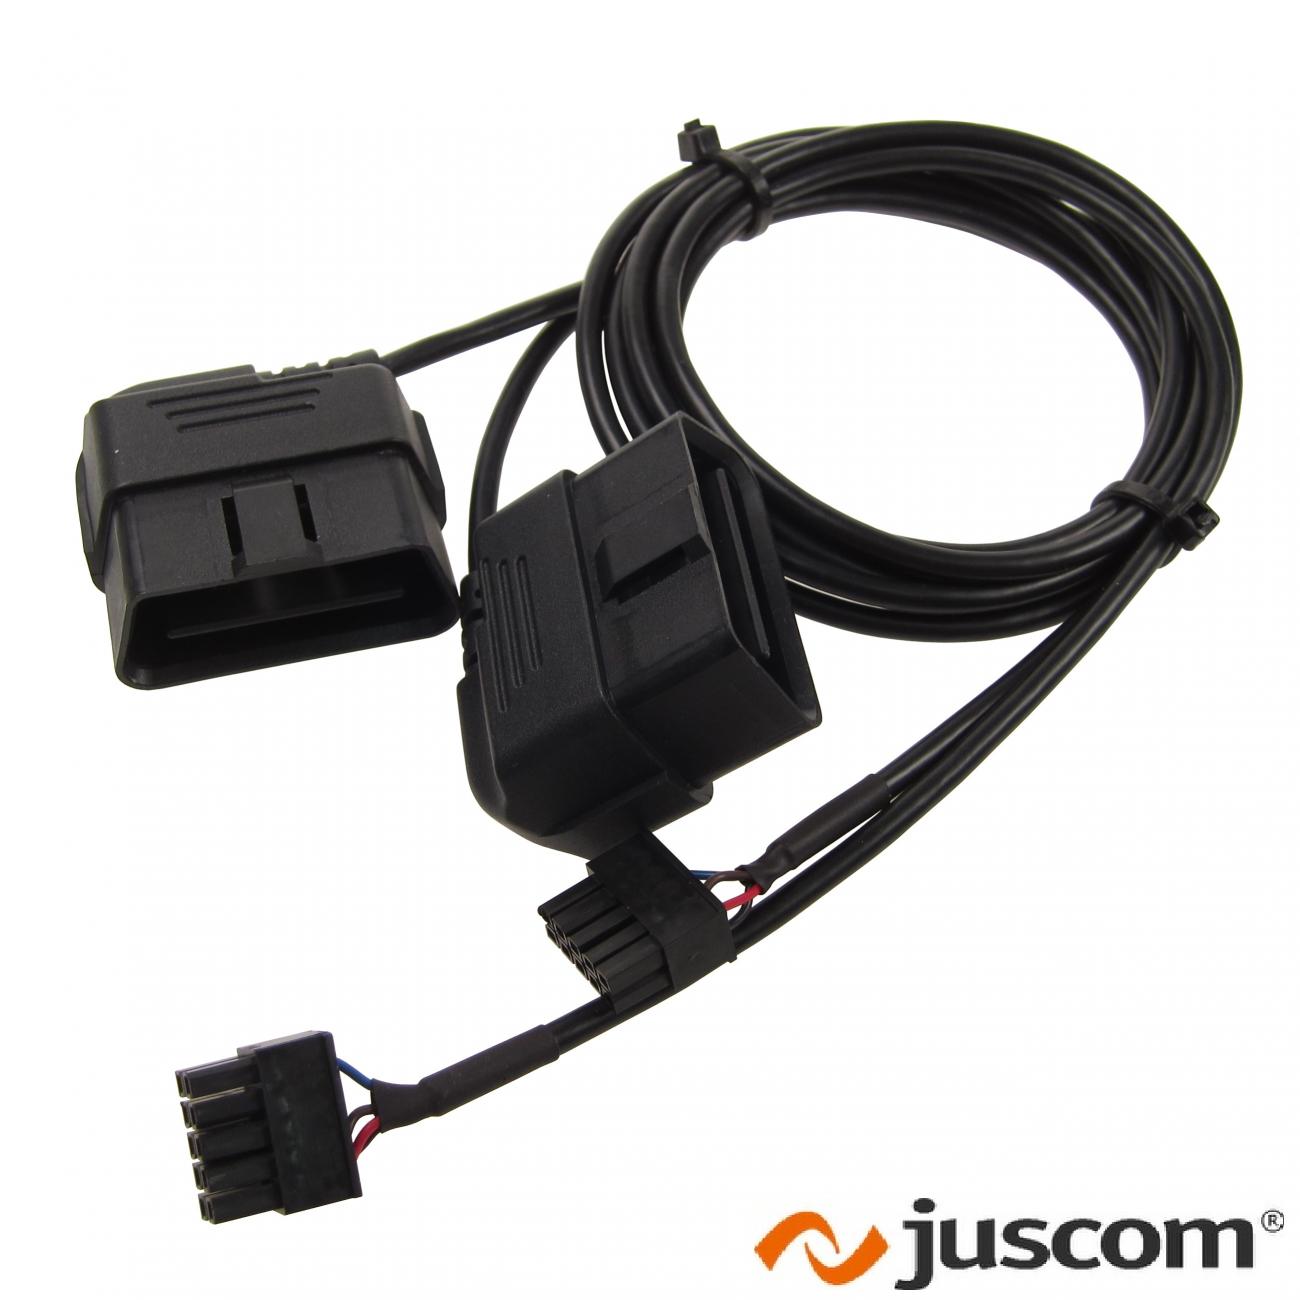 Automotive wire harness with hot-melt molding